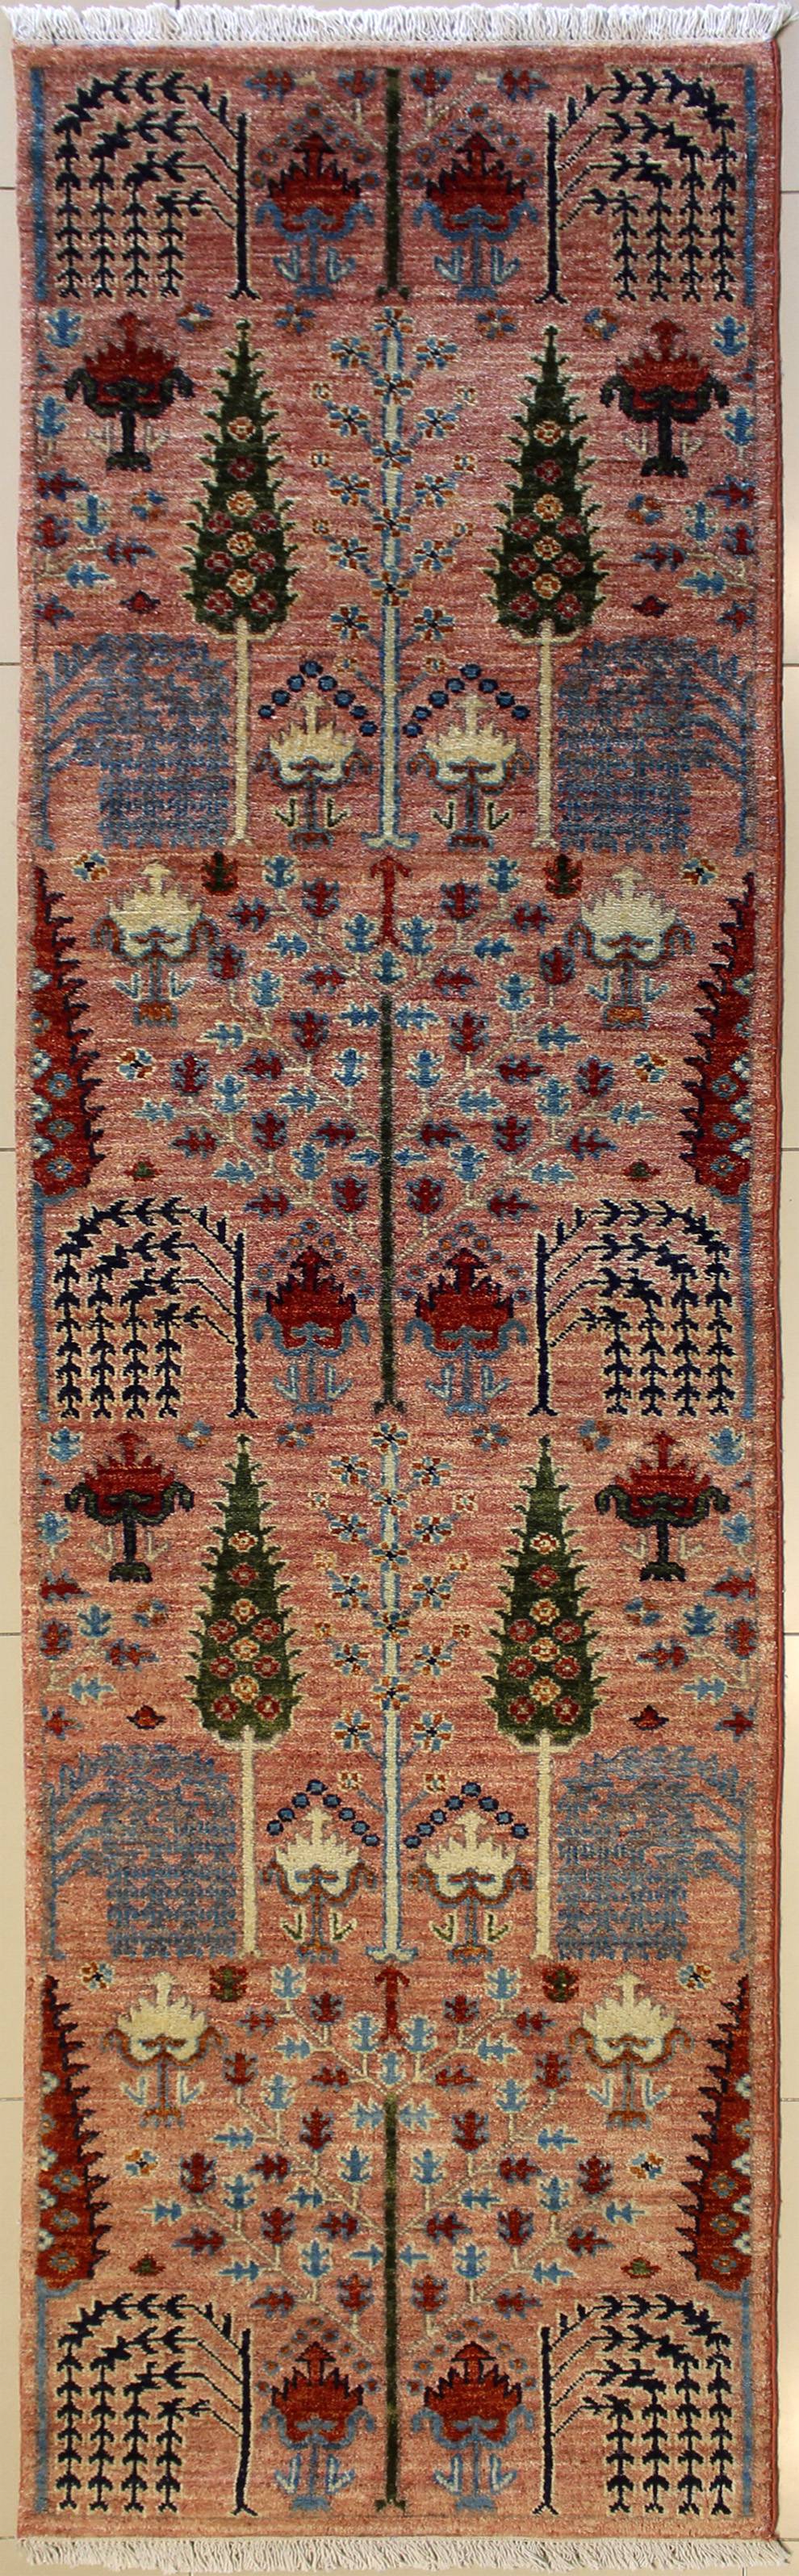 2'2 x 4'7 Double Knot Ziegler Chobi Design Area Rug with Wool Pile an Authentic Hand Knotted Chobi Ziegler Rug Made with Vegetable Dyes a 2x5 Small Rug 